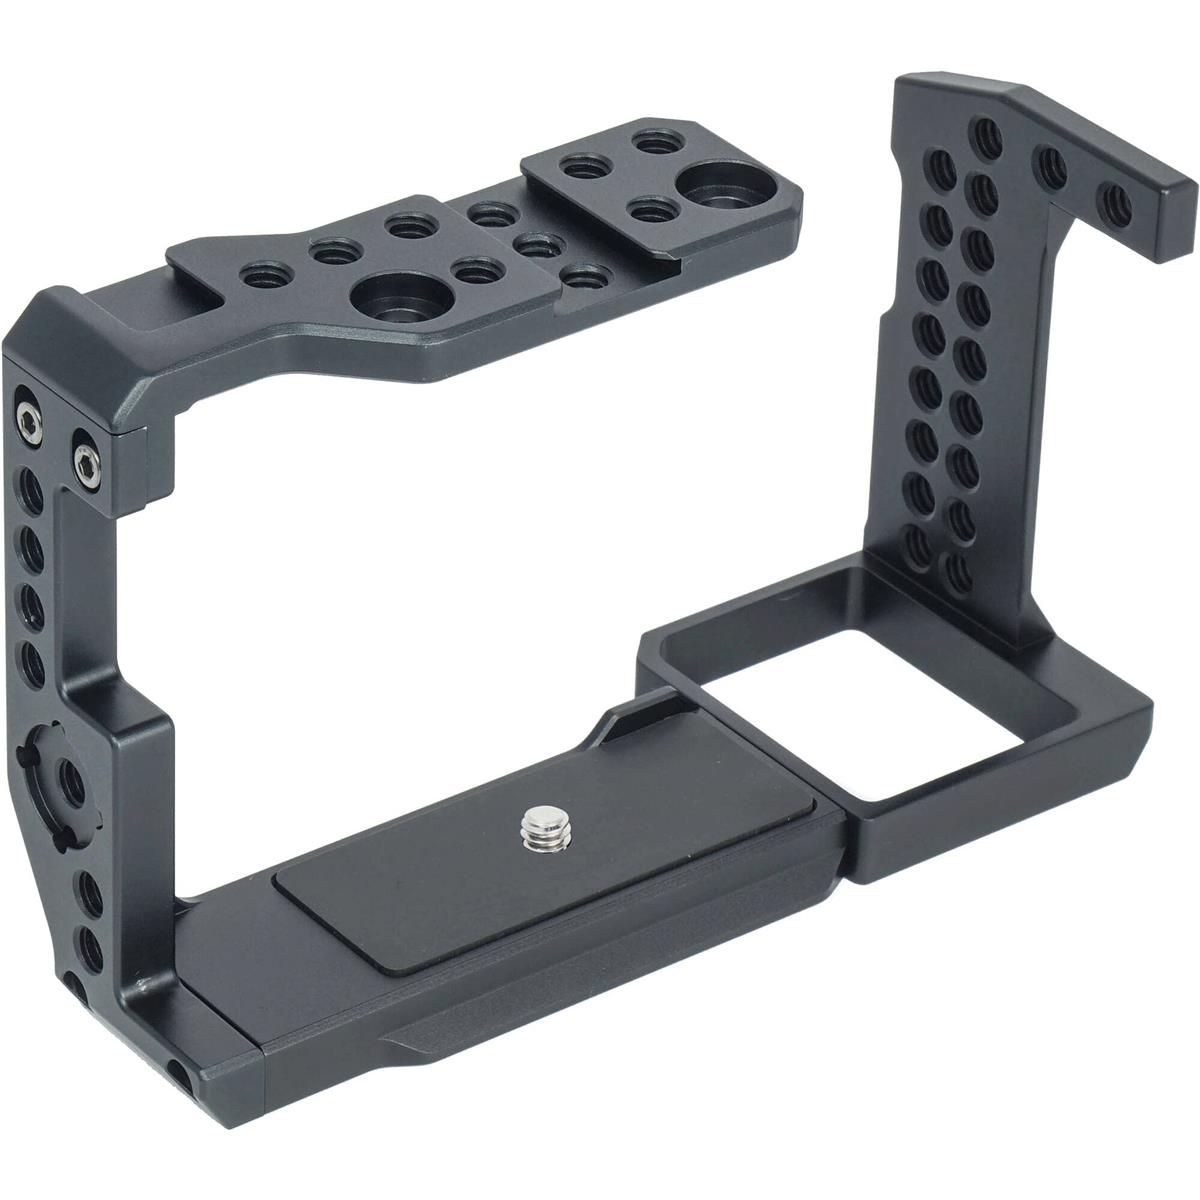 Image of Came-TV Cage for Sony FX3 Camera